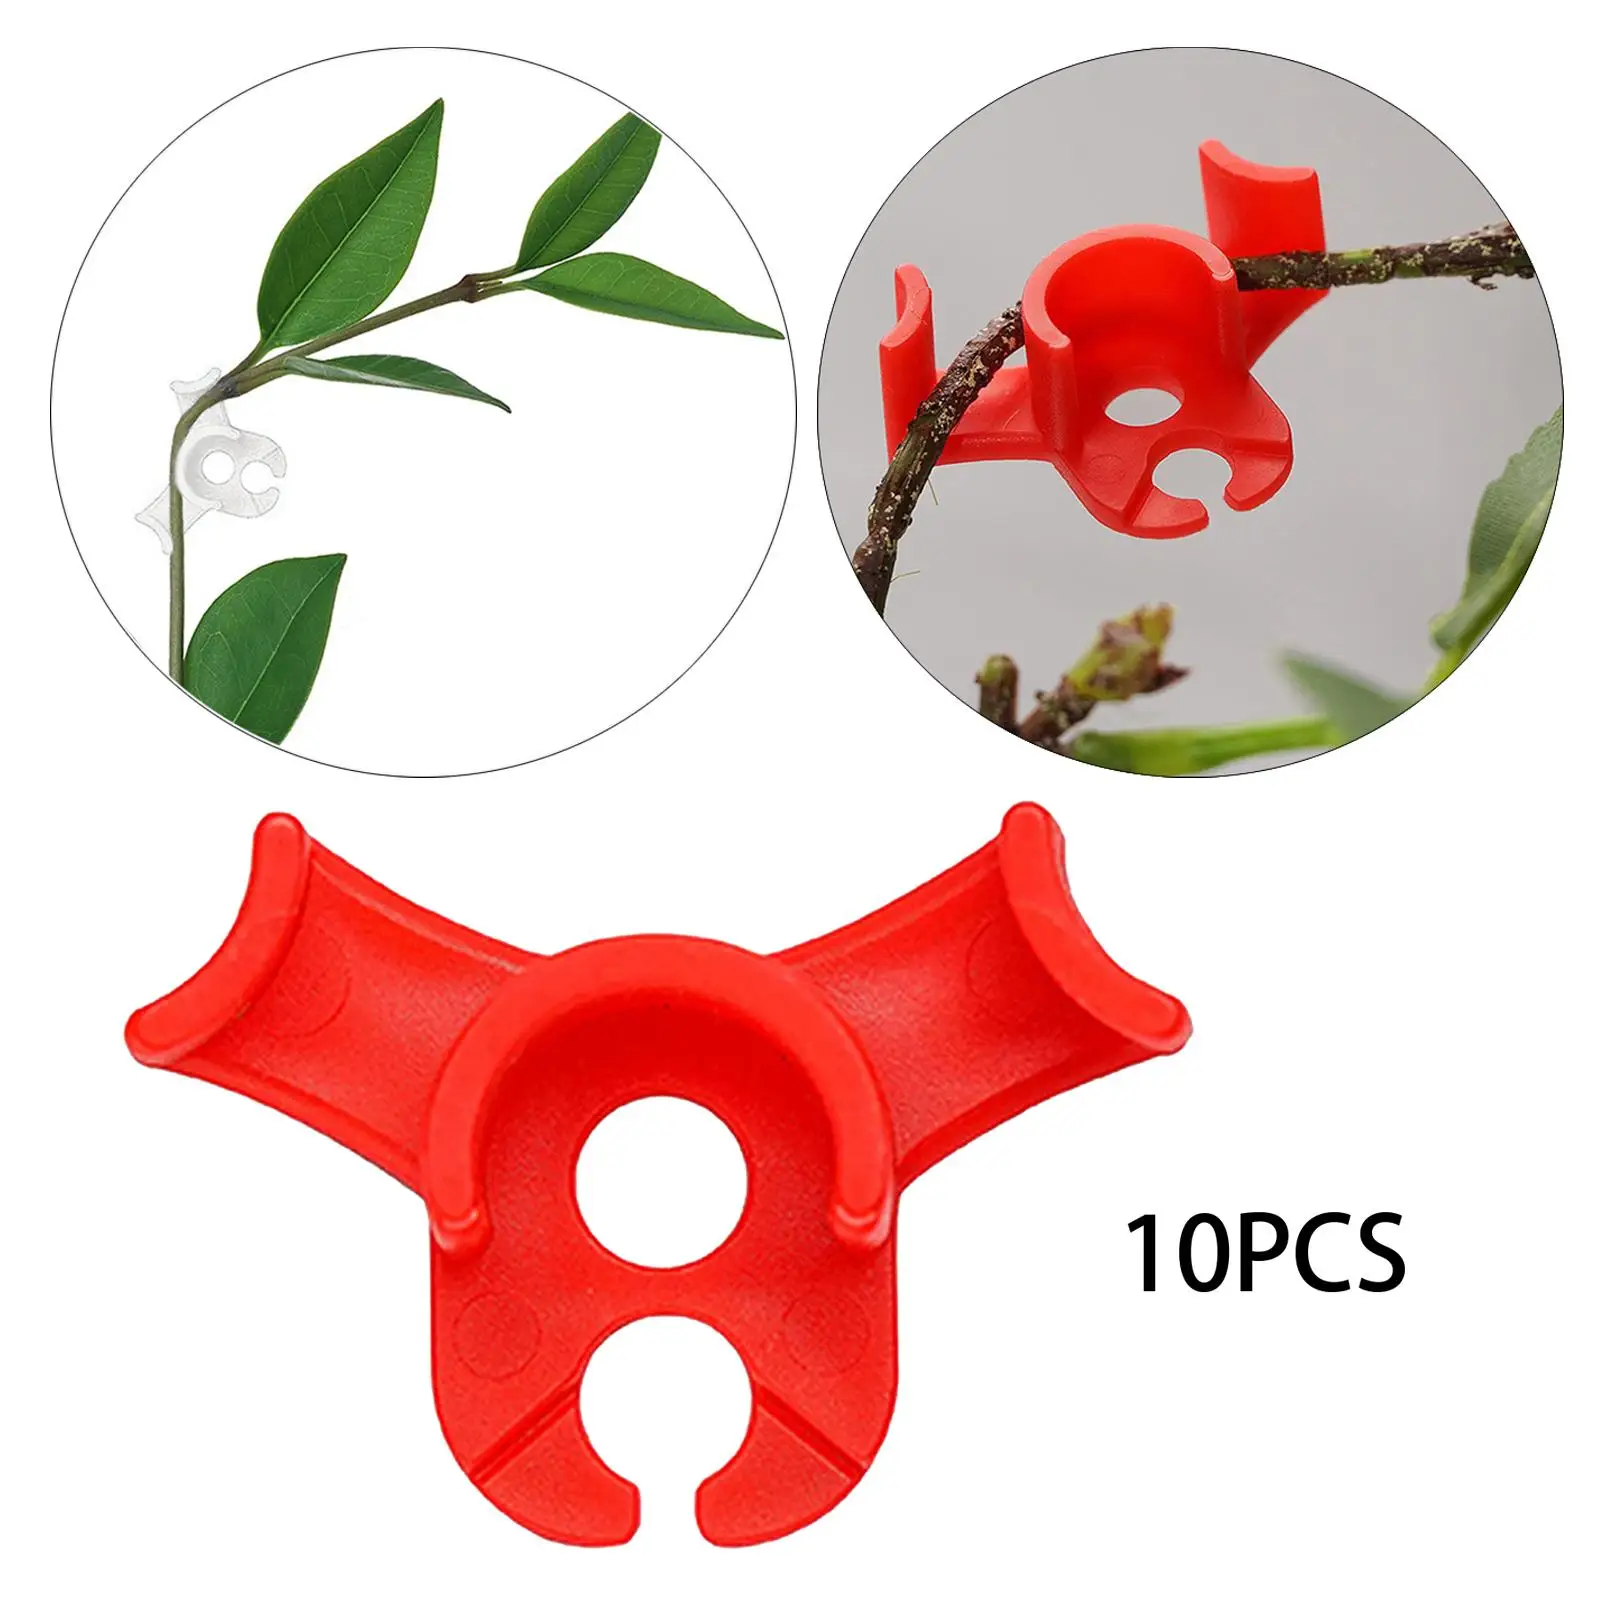 10 Pieces Lst Clip Control The Growth for Low Stress Training Plant Bender